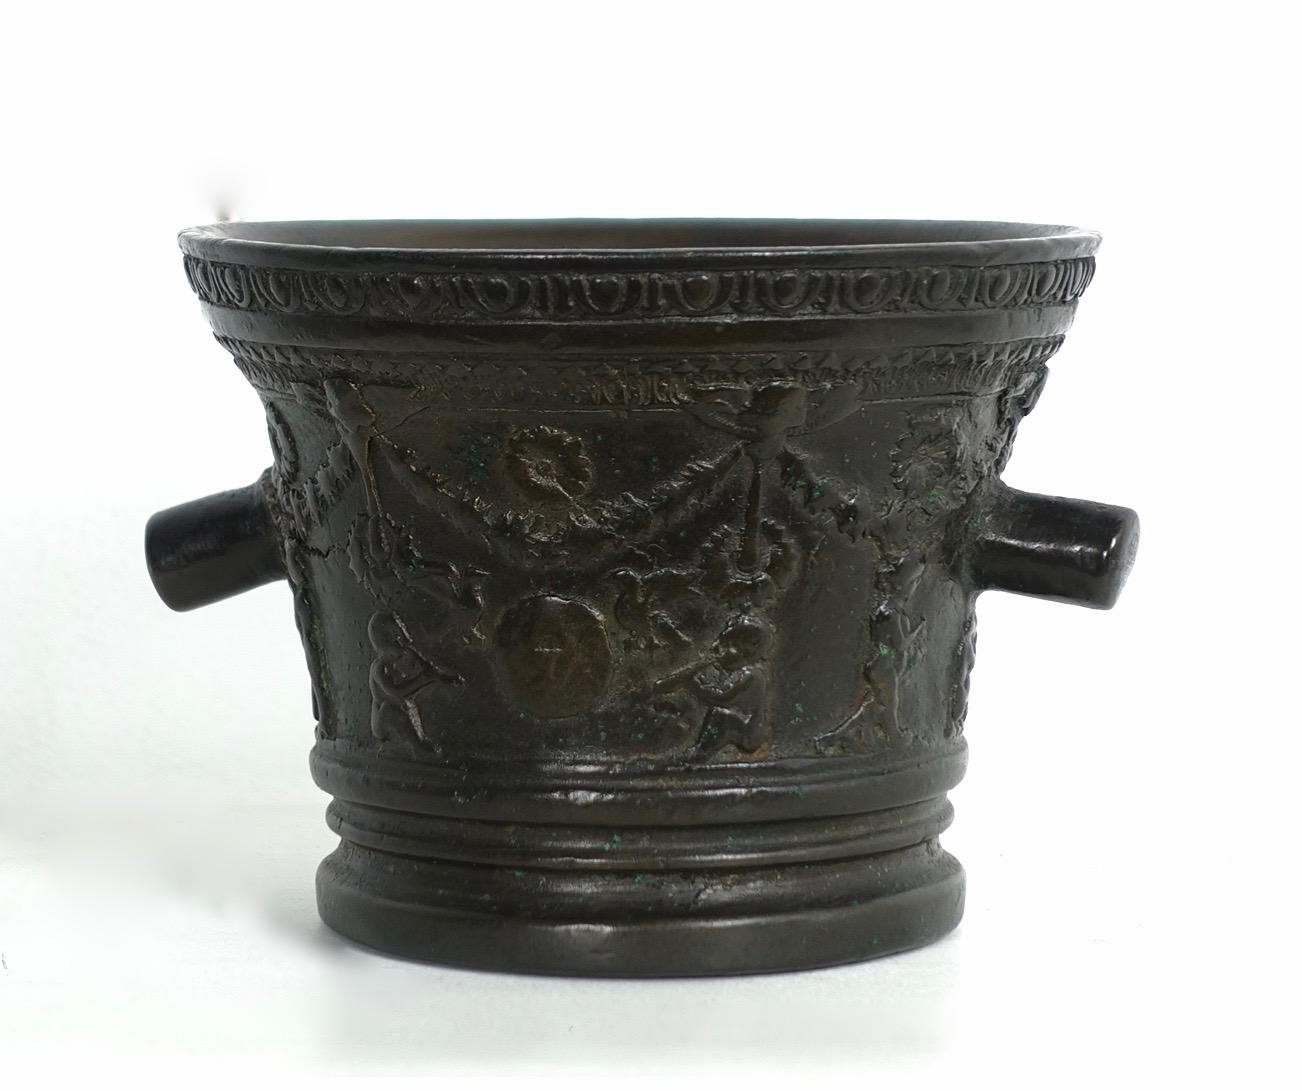 Bronze mortar with garlands, flowers and putti - Tuscany , second half of 17th century.
Measures: height 10 
diameter : 13 cm

Artisans and healers used mortars for grinding food, dyes and drugs. The rich friezes on this bronze mortar suggest